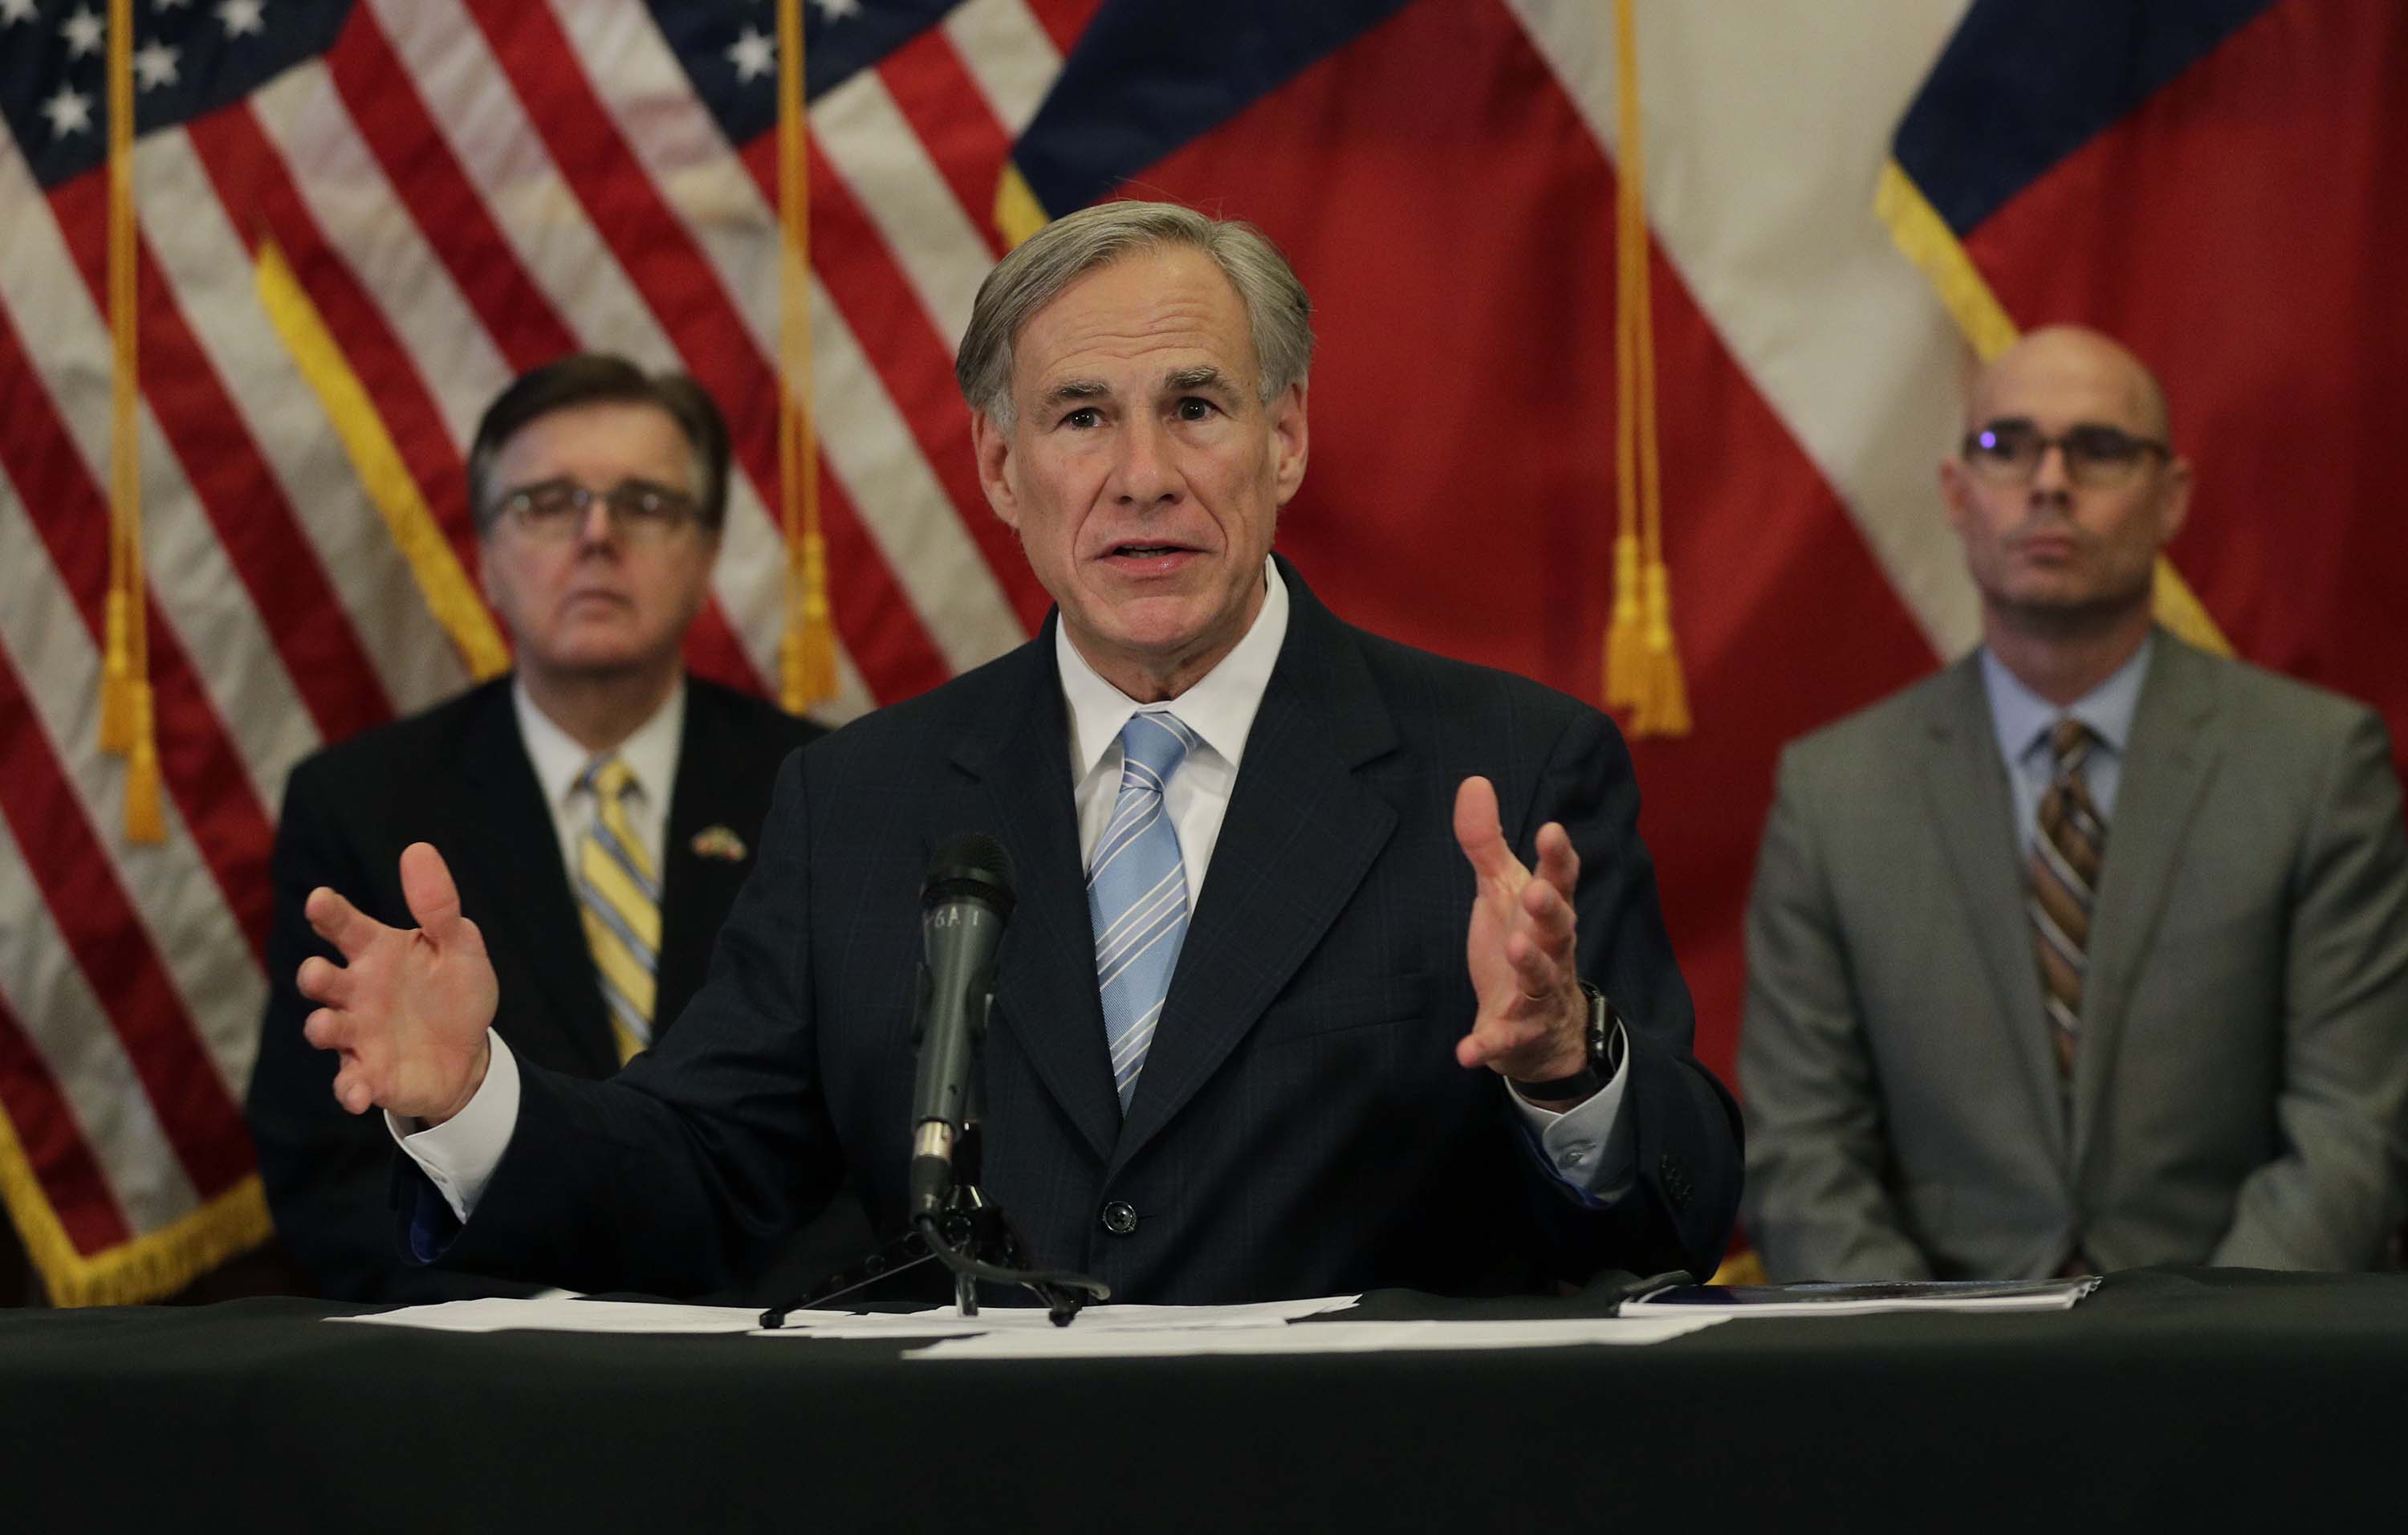 Texas Governor Greg Abbott speaks during a news conference where he announced he would relax some restrictions imposed on businesses due to the COVID-19 pandemic, on Monday, April 27, in Austin, Texas.